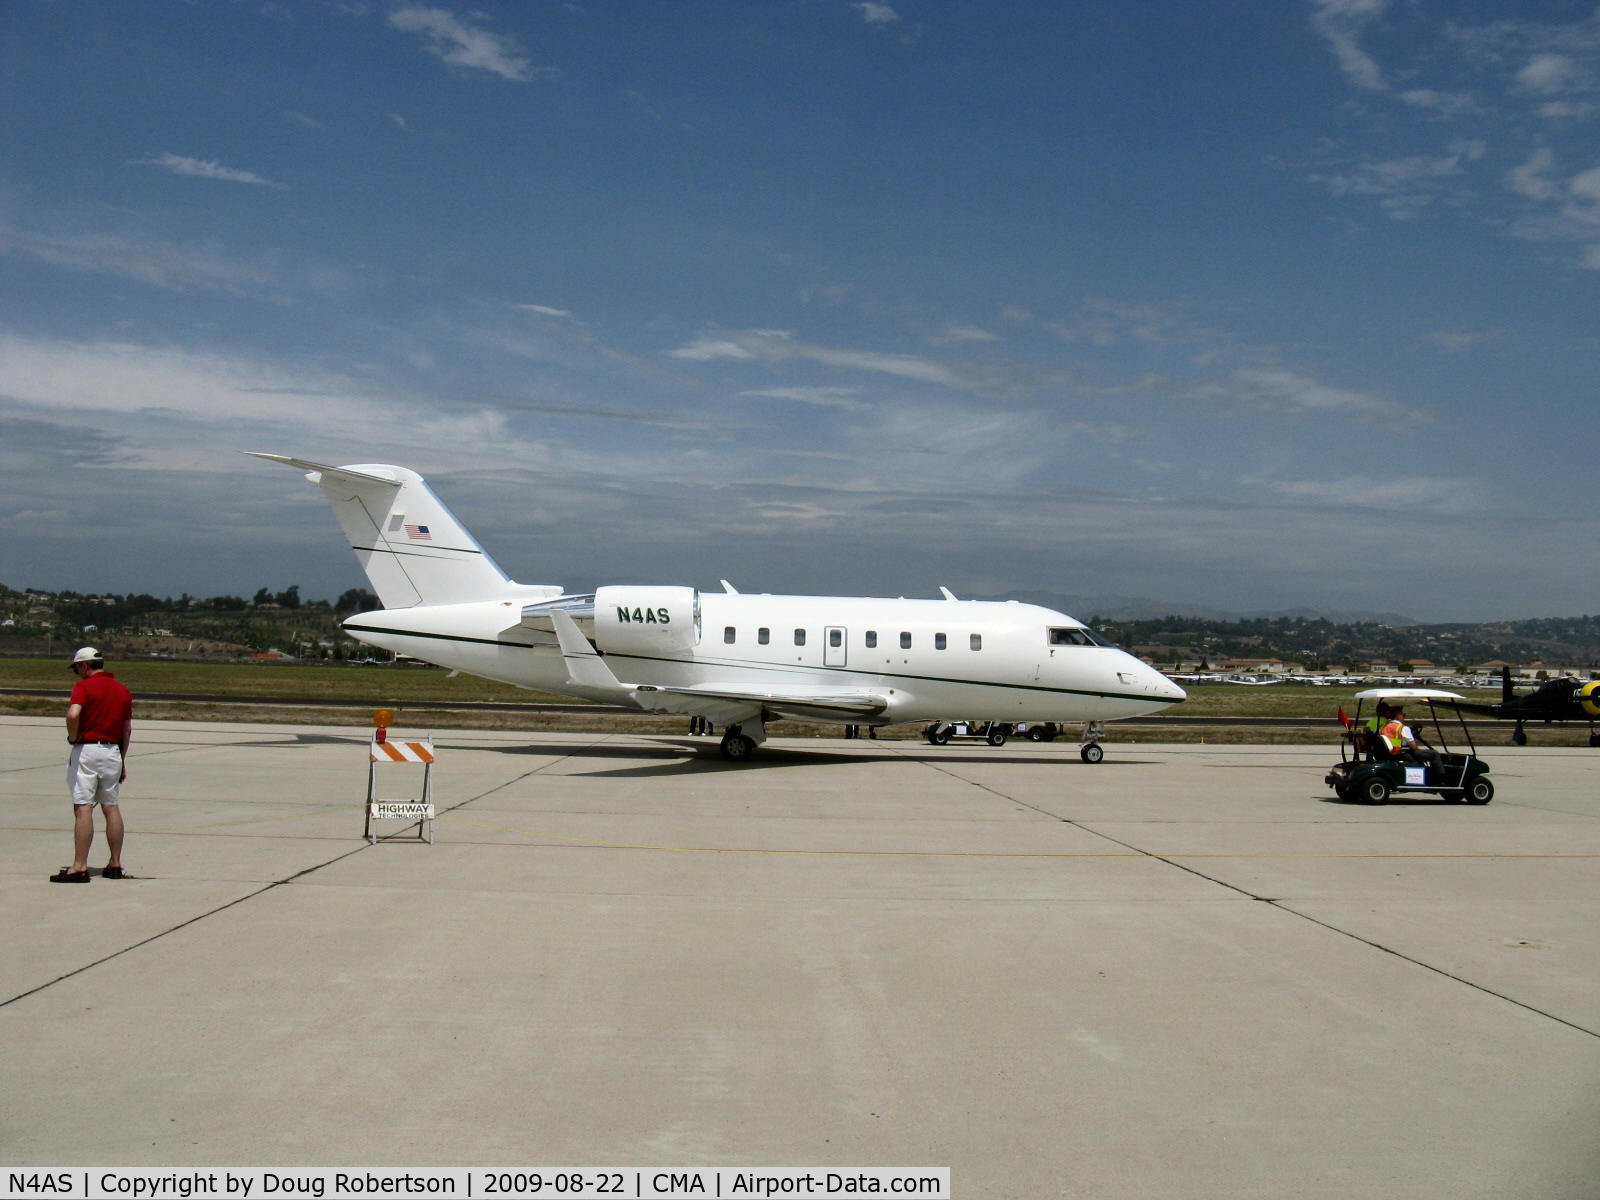 N4AS, 2007 Bombardier Challenger 605 (CL-600-2B16) C/N 5721, 2007 Bombbardier CL-600-2B16 CHALLENGER 604, two General Electric CF34-3B1 turbofans 9,220 lb st each, taxi